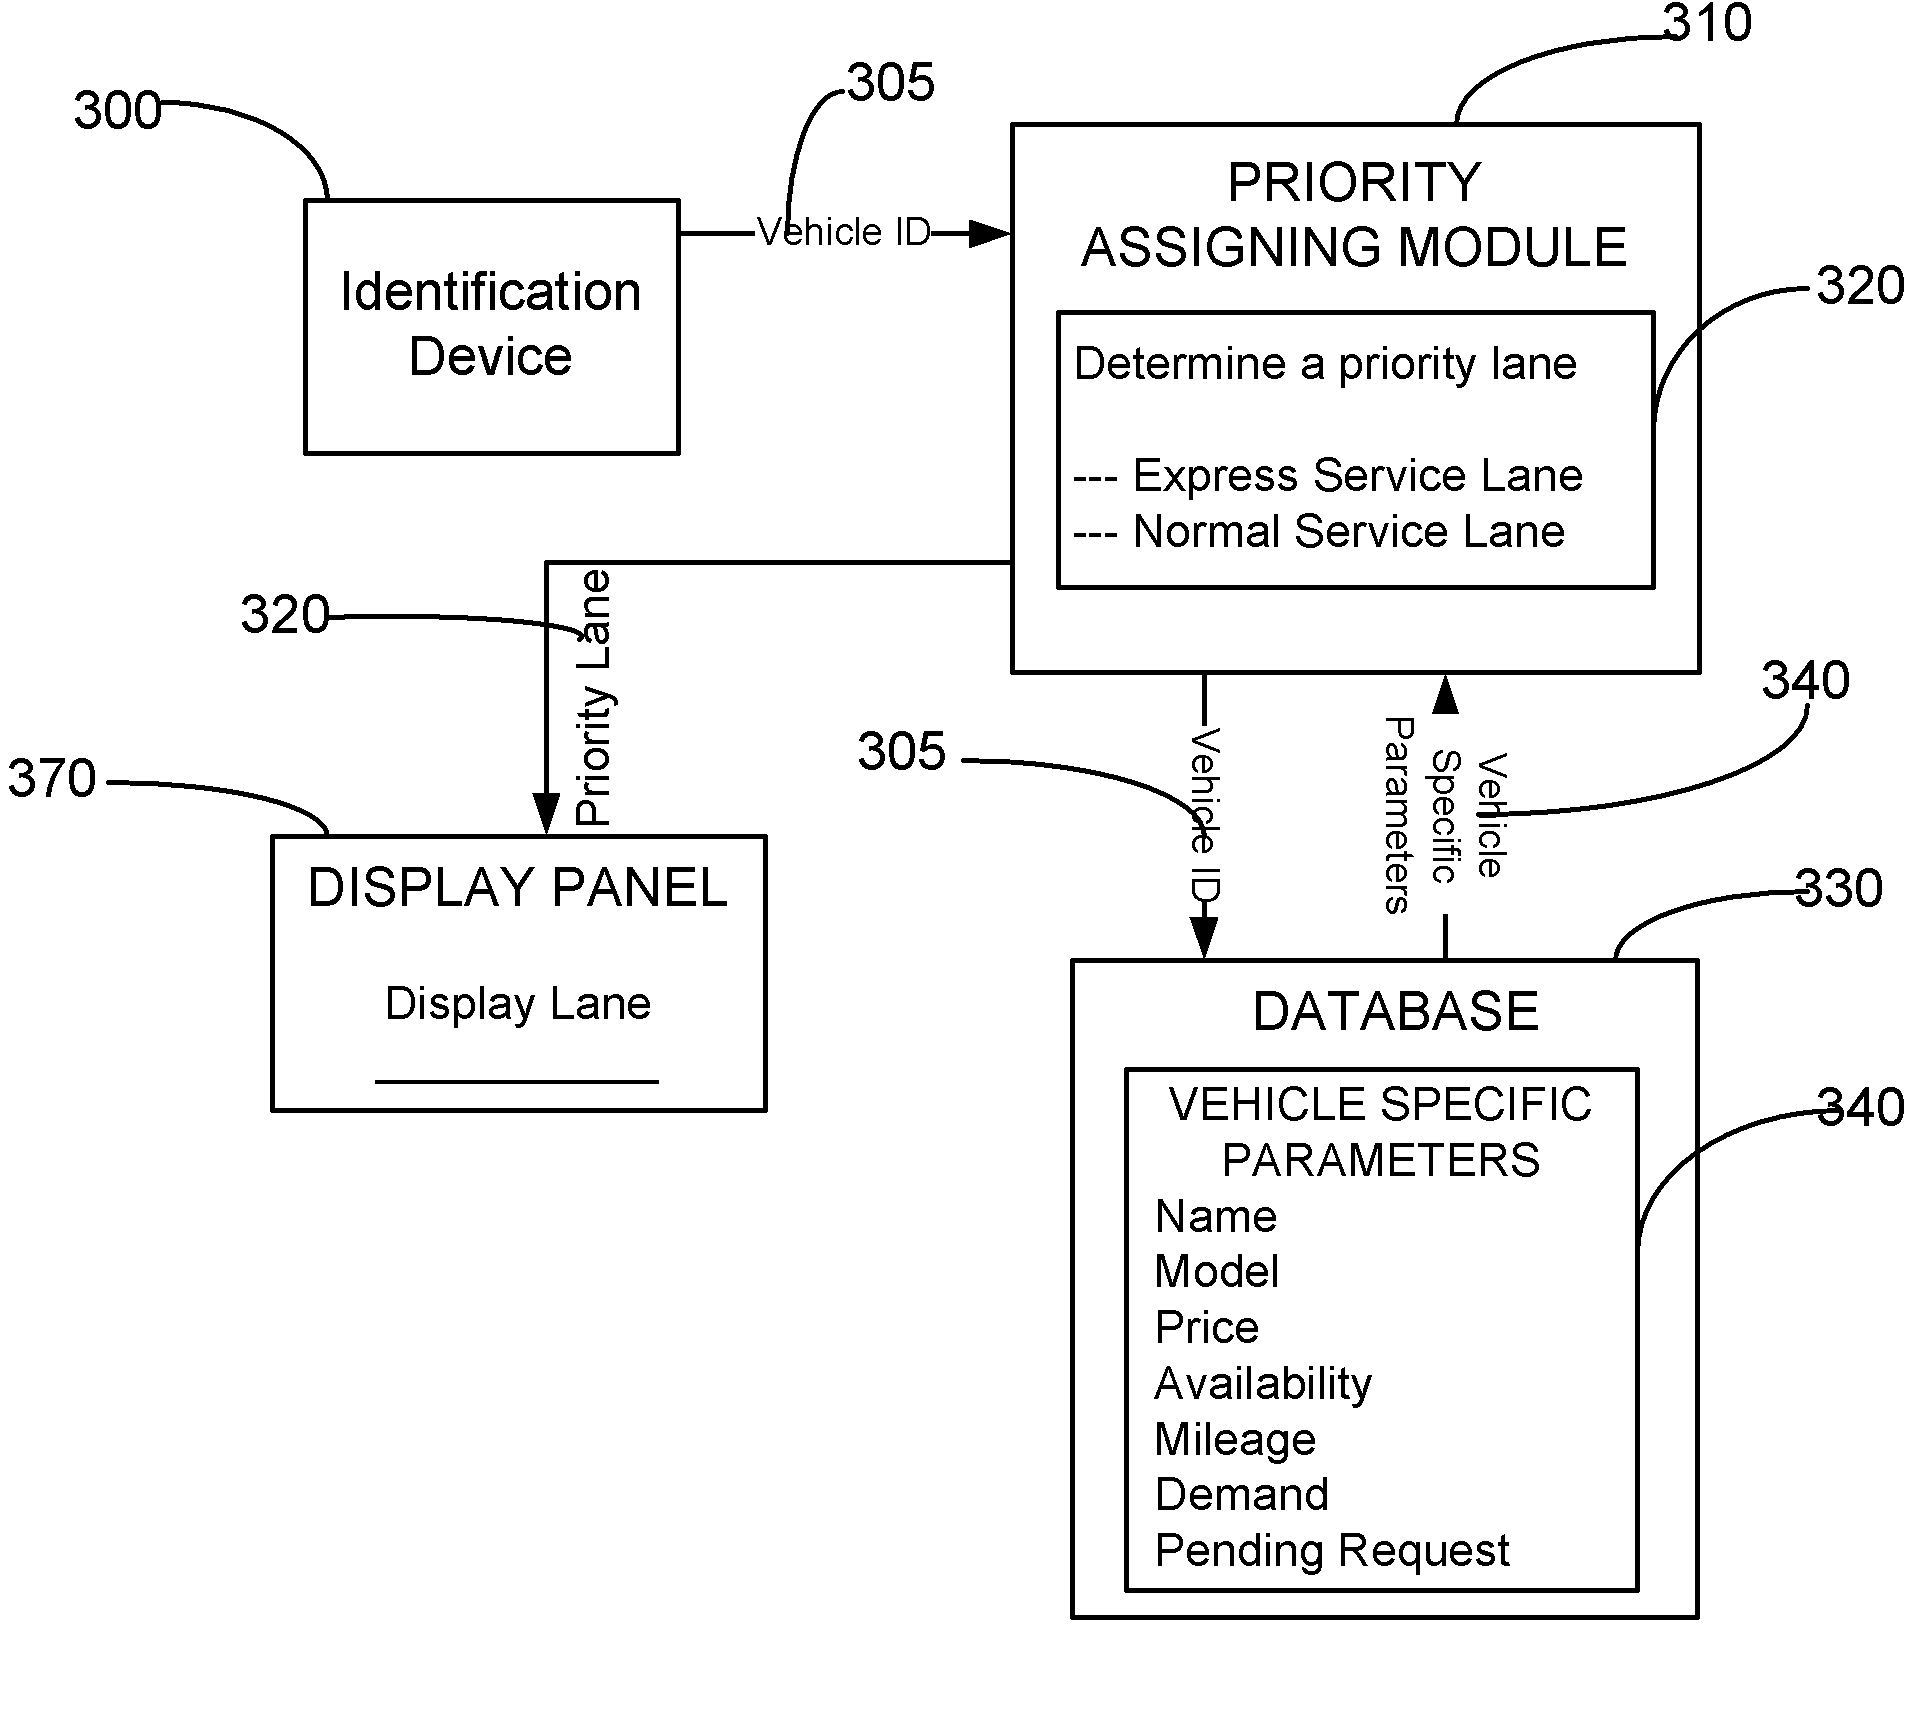 Method for displaying dynamically determined priority lanes to customers returning vehicles to a vehicle rental company